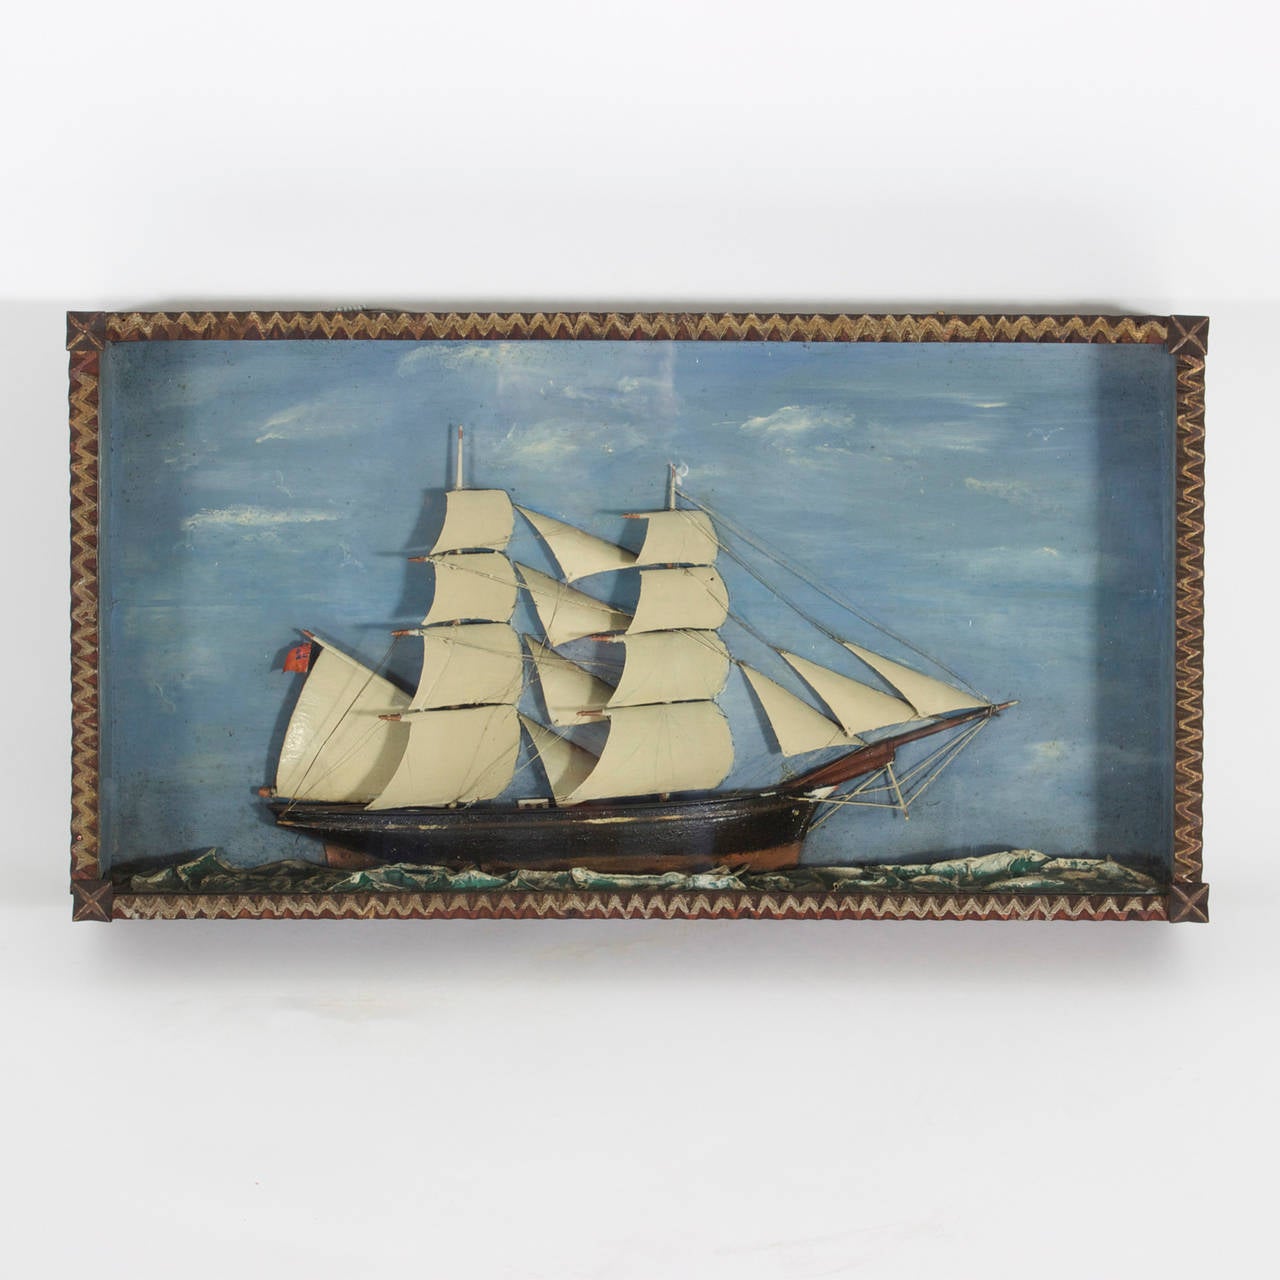 Folky diorama of an English sailing ship complete with sails and rigging, flying the Union Jack and presented in a charming handmade case .